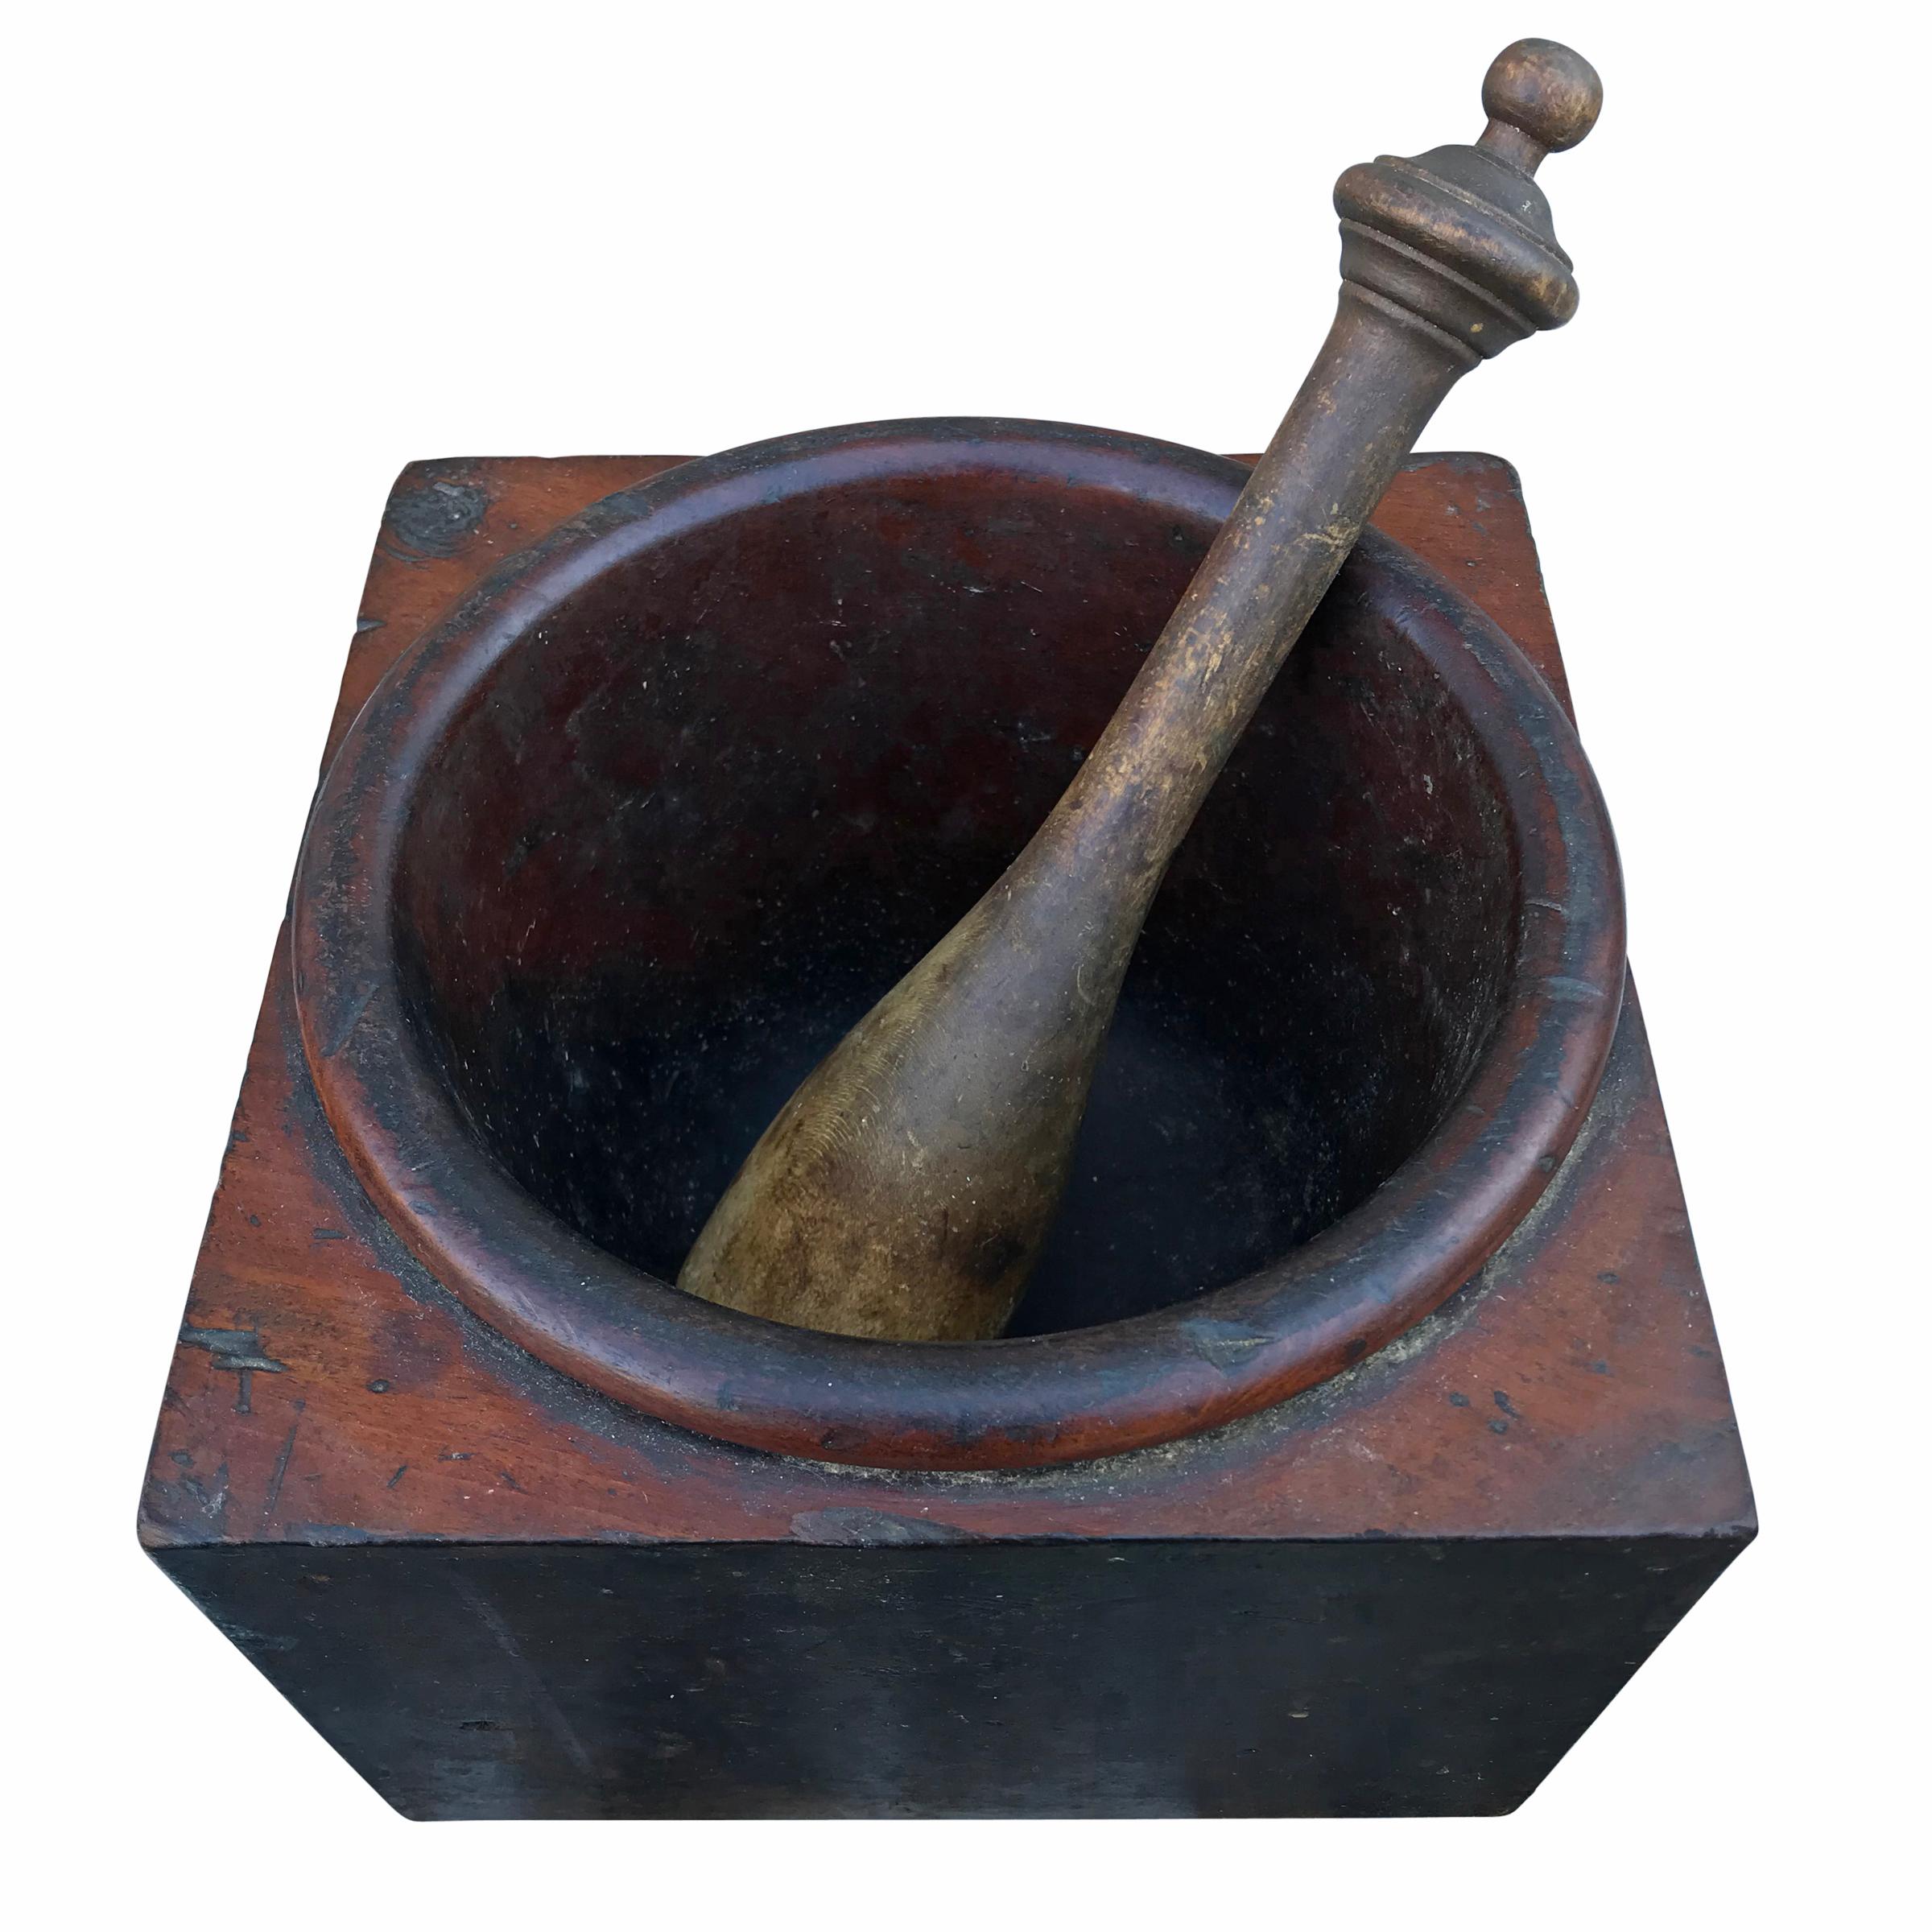 A fantastic 19th century American kitchen hardwood mortar with a turned softwood pestle. It’s likely that this mortar would have lived in a larger wood or marble holder, and removed when necessary. Two small holes on the bottom would have held the